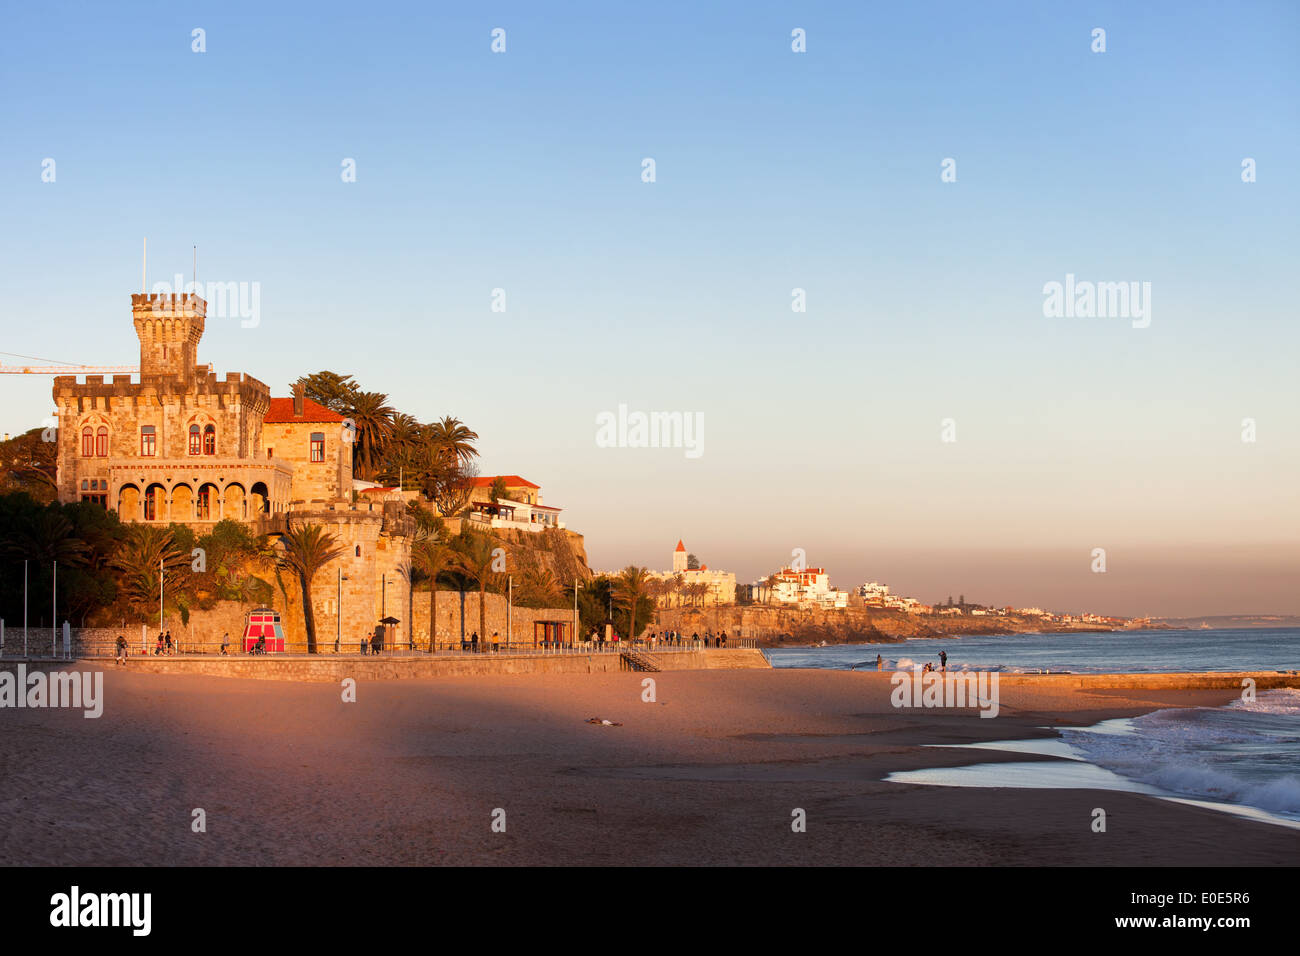 Tranquil scenery by the Atlantic Ocean, Tamariz Beach overlooked by a castle at sunset in resort town of Estoril in Portugal. Stock Photo